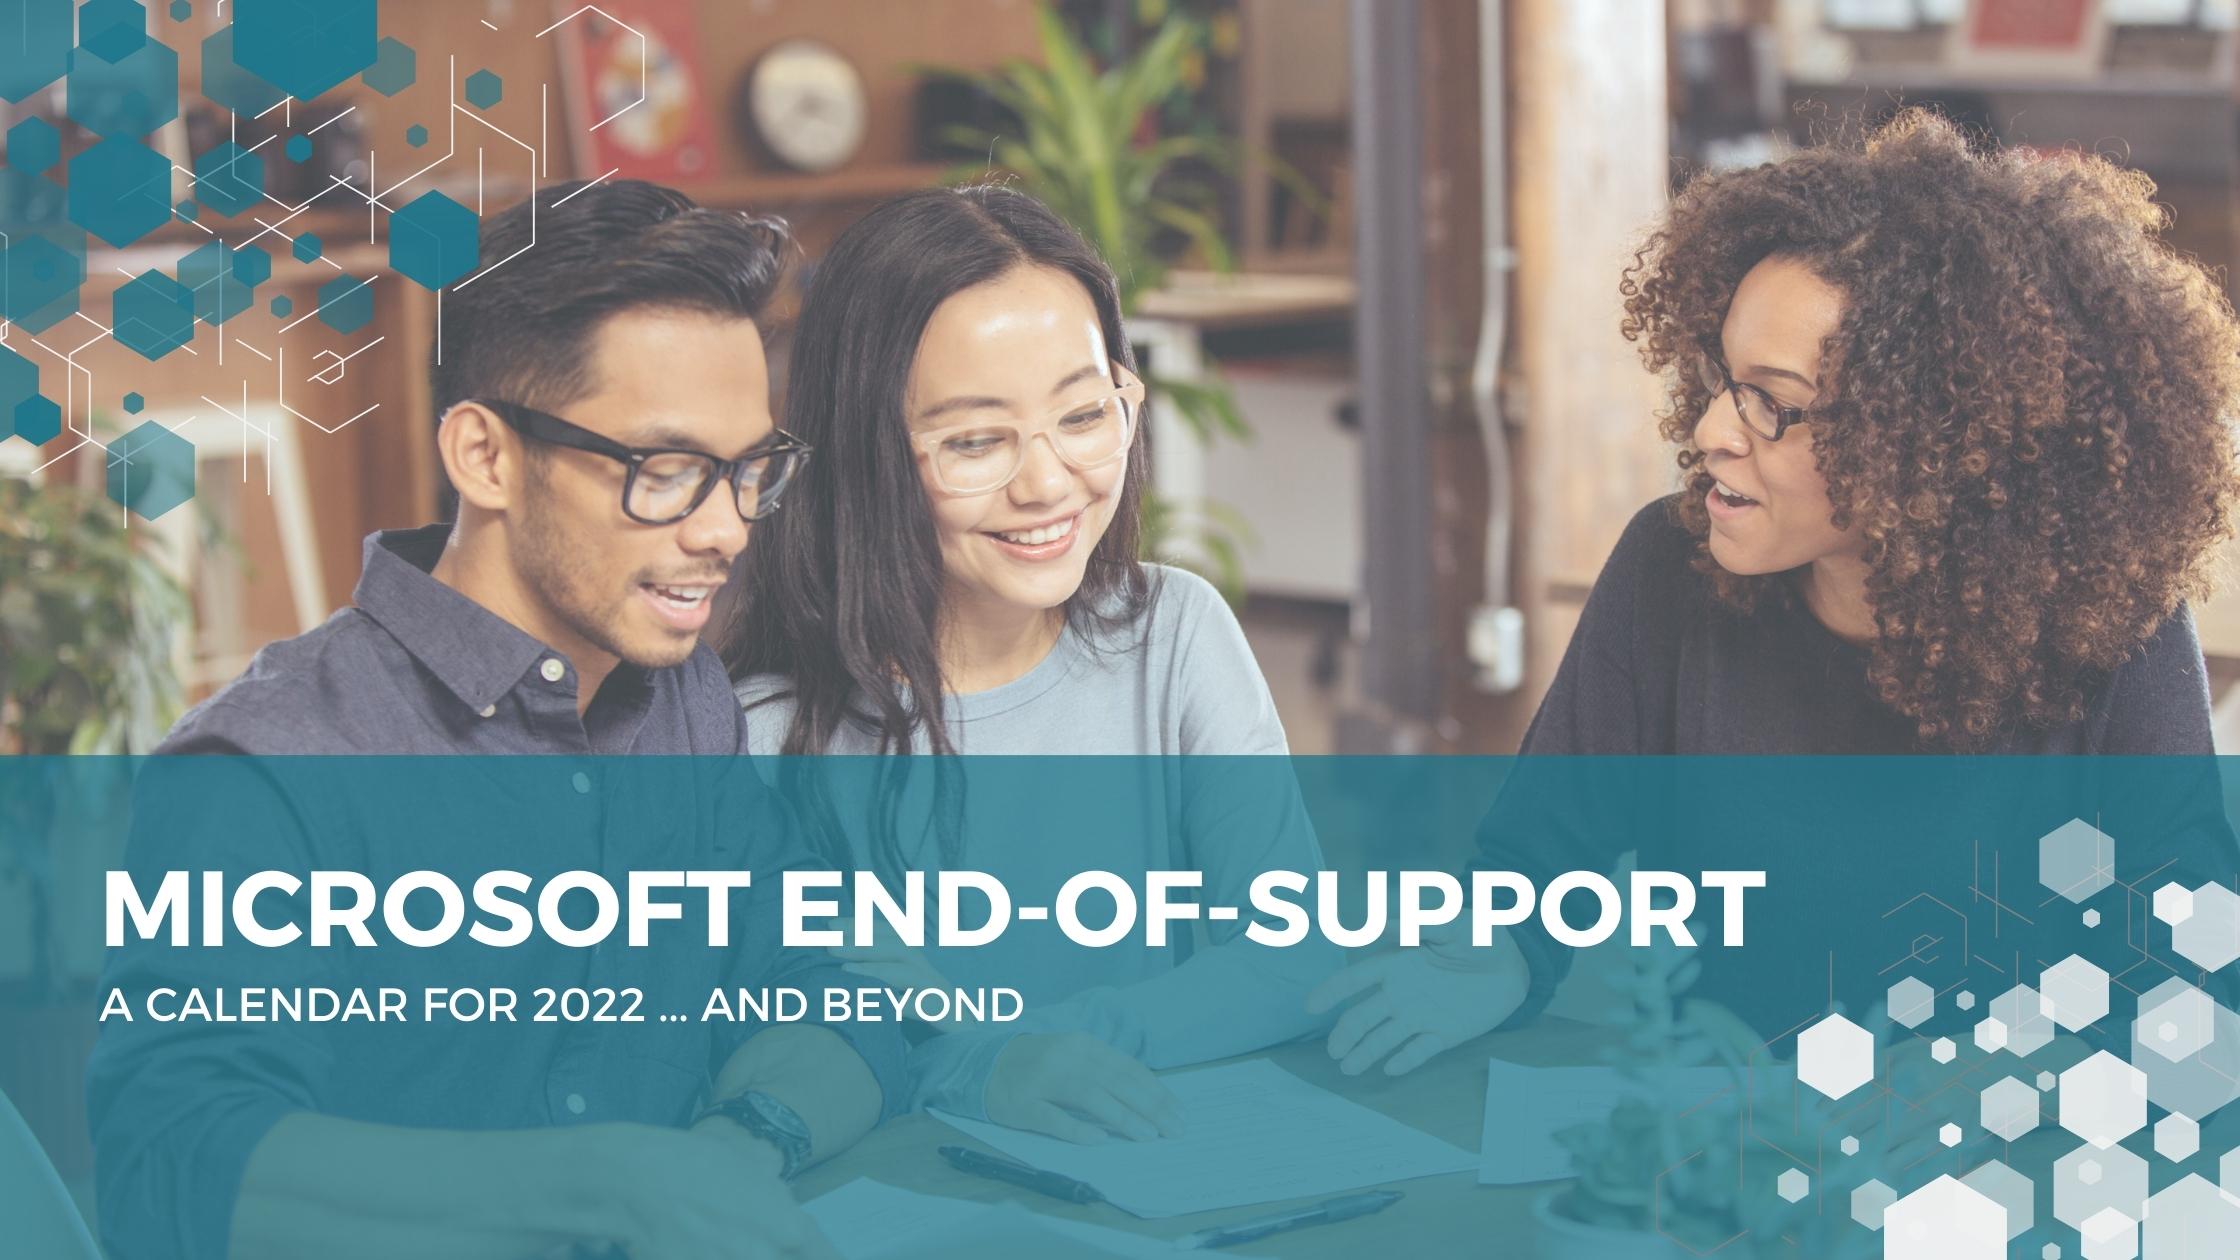 Microsoft End-of-Support Calendar                          For 2022 ... and beyond